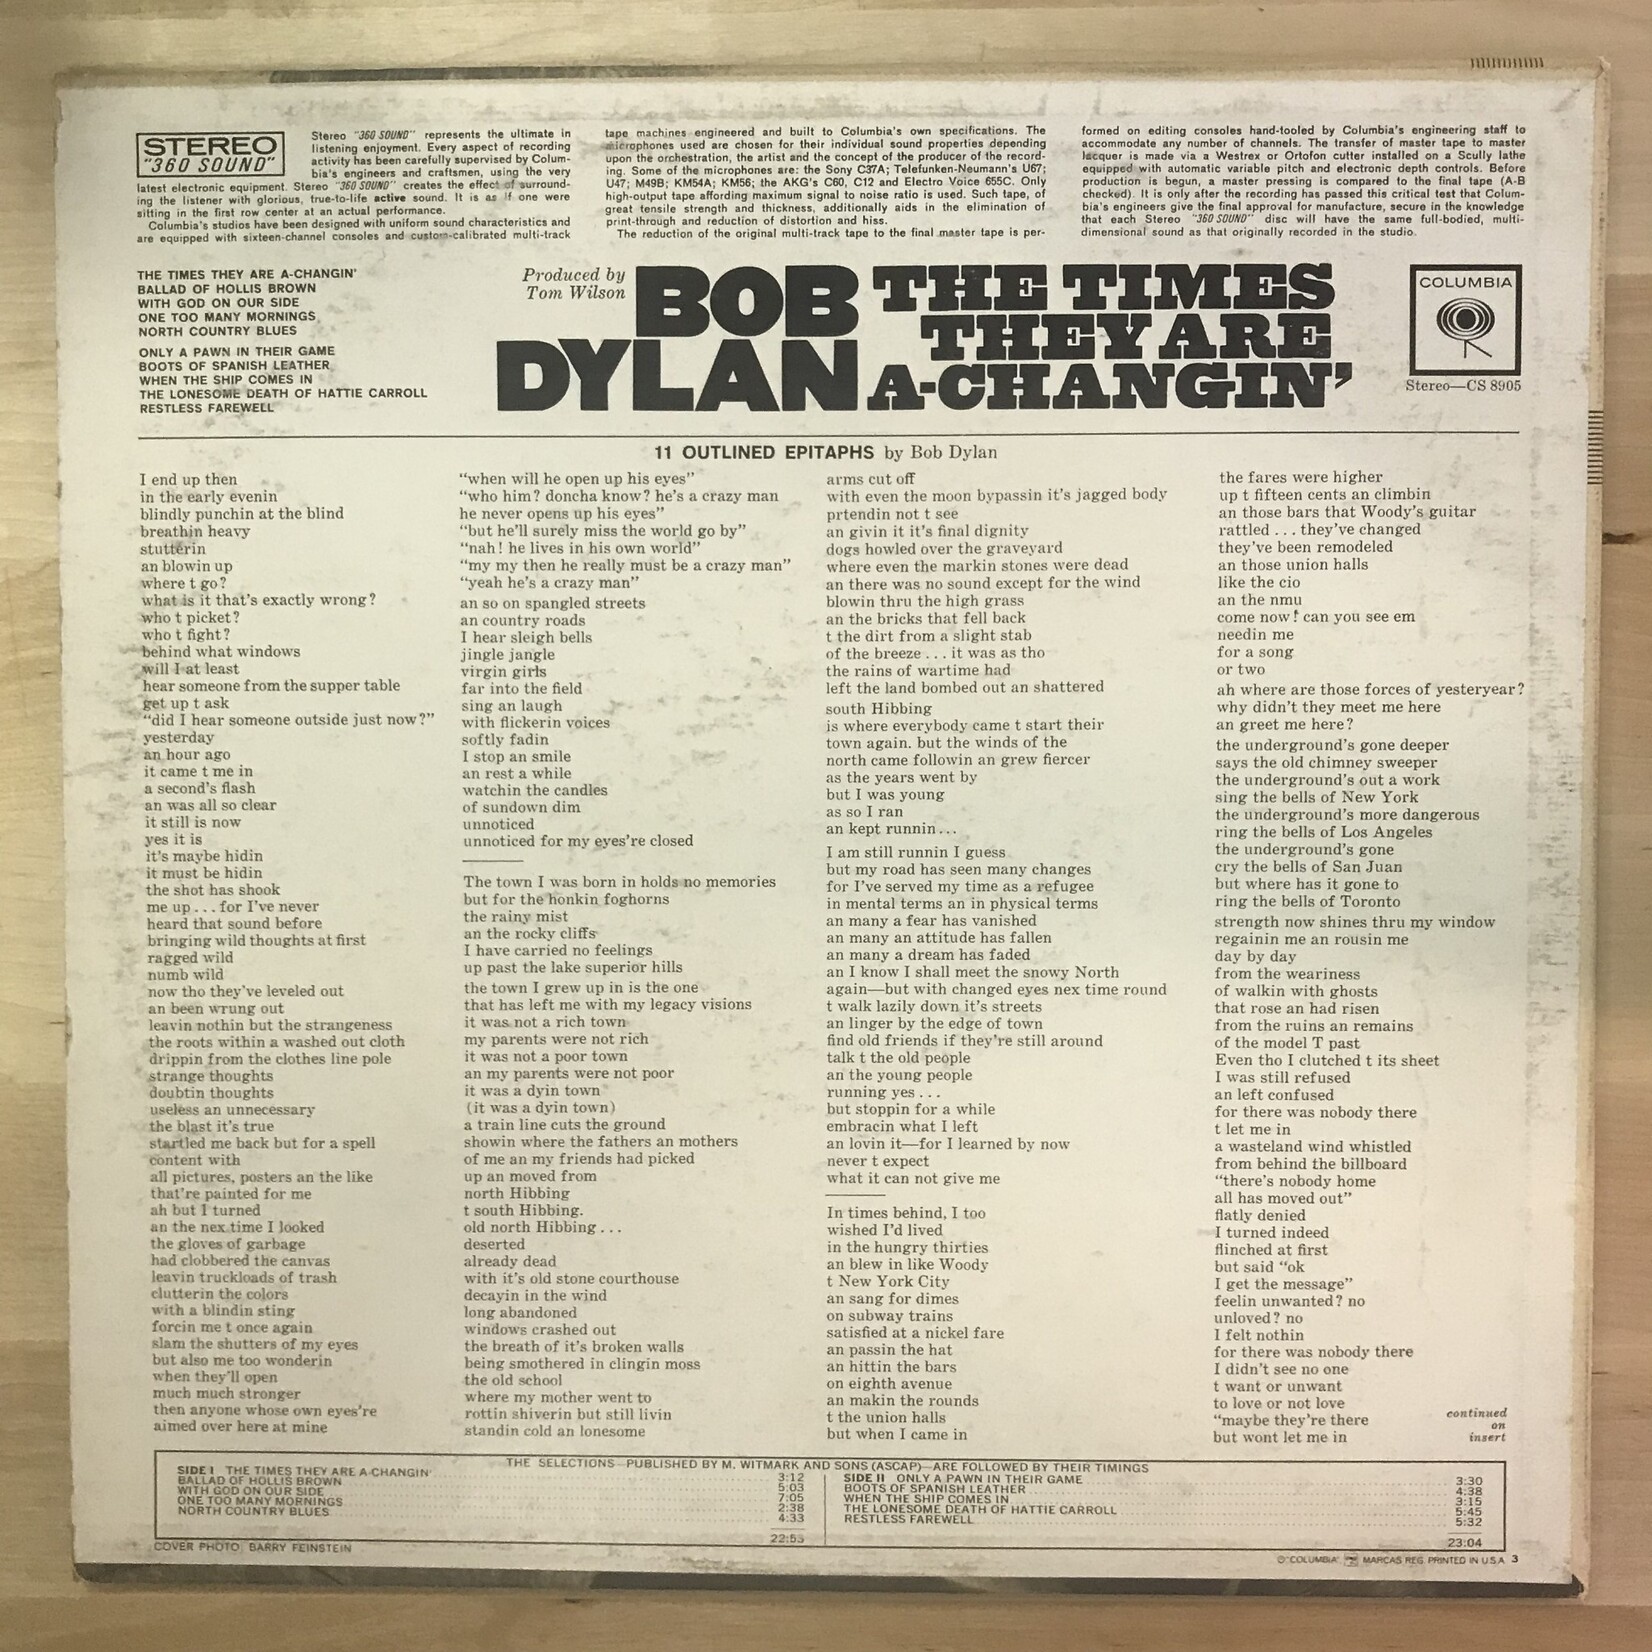 Bob Dylan - The Times They Are A-Changin’ - CS8905 - Vinyl LP (USED)